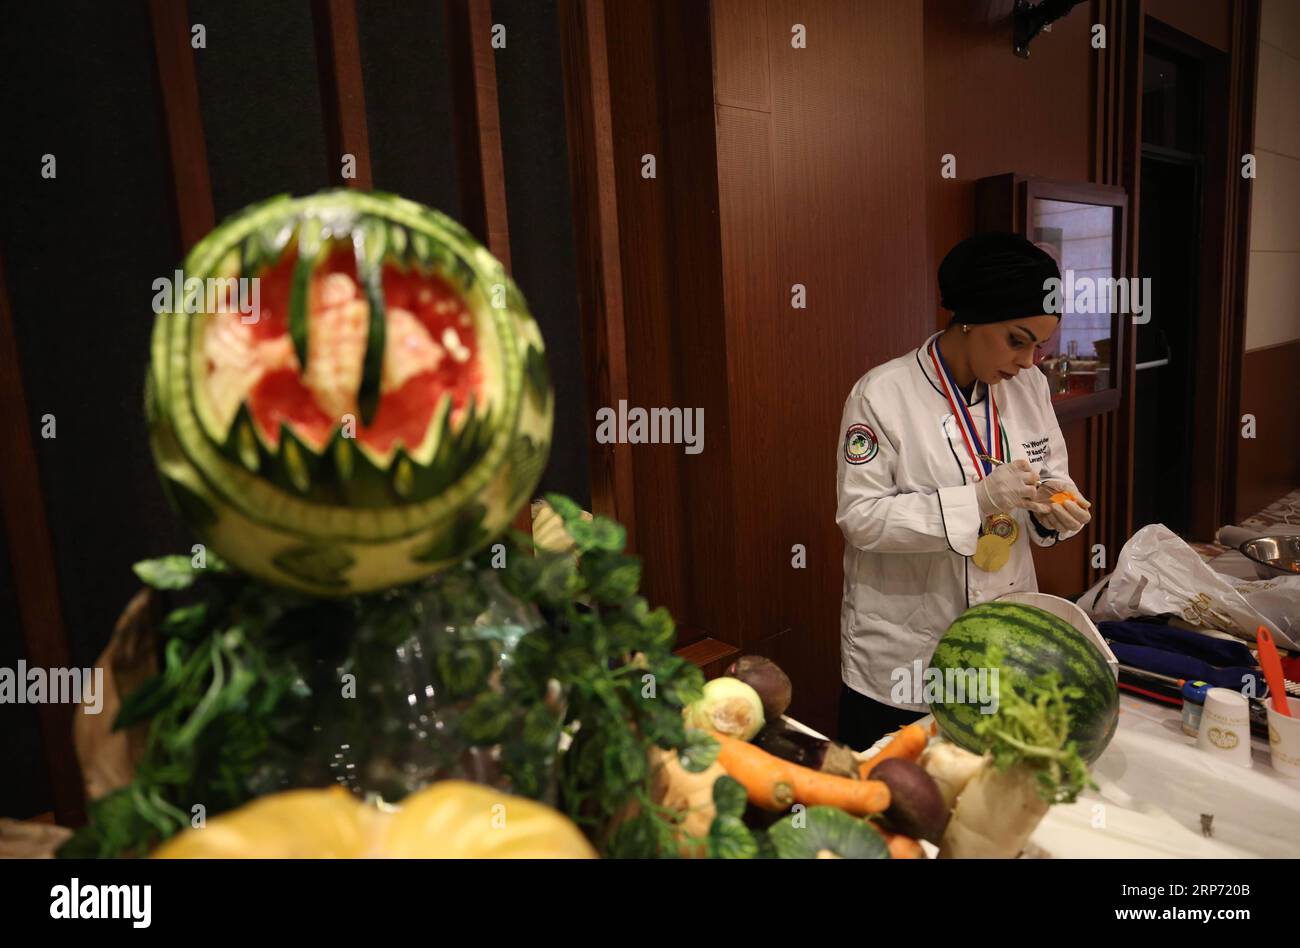 (190124) -- NABLUS, Jan. 24, 2019 -- A chef takes part in a national cooking contest in the West Bank City of Nablus, Jan. 22, 2019. Although similar to the general Mediterranean gastronomical culture, the Palestinian cuisine stands out with an array of tasteful spices and herbs. The newly established master chefs association in Palestine organized a national cooking contest, with the aim of choosing the winning chefs to join a national team that will be trained to compete internationally. Over 150 Palestinian chefs gathered at the contest for three days in West Bank s Nablus city, presenting Stock Photo